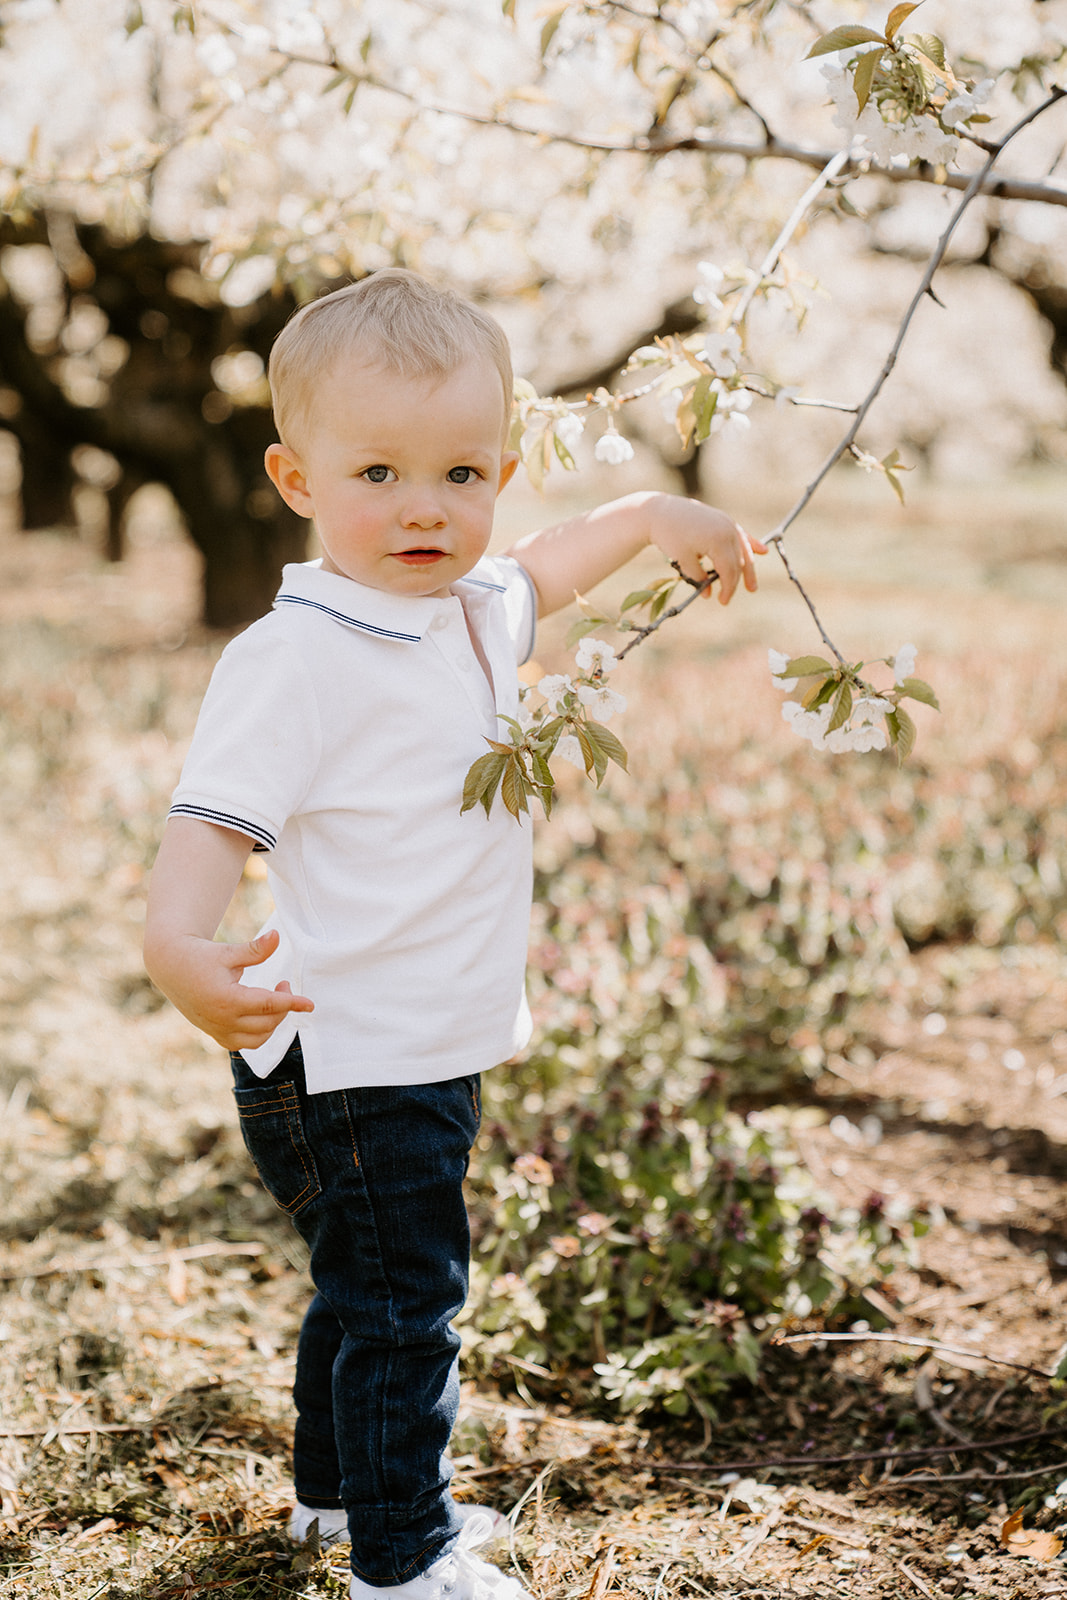 Toddler standing and touching a branch.